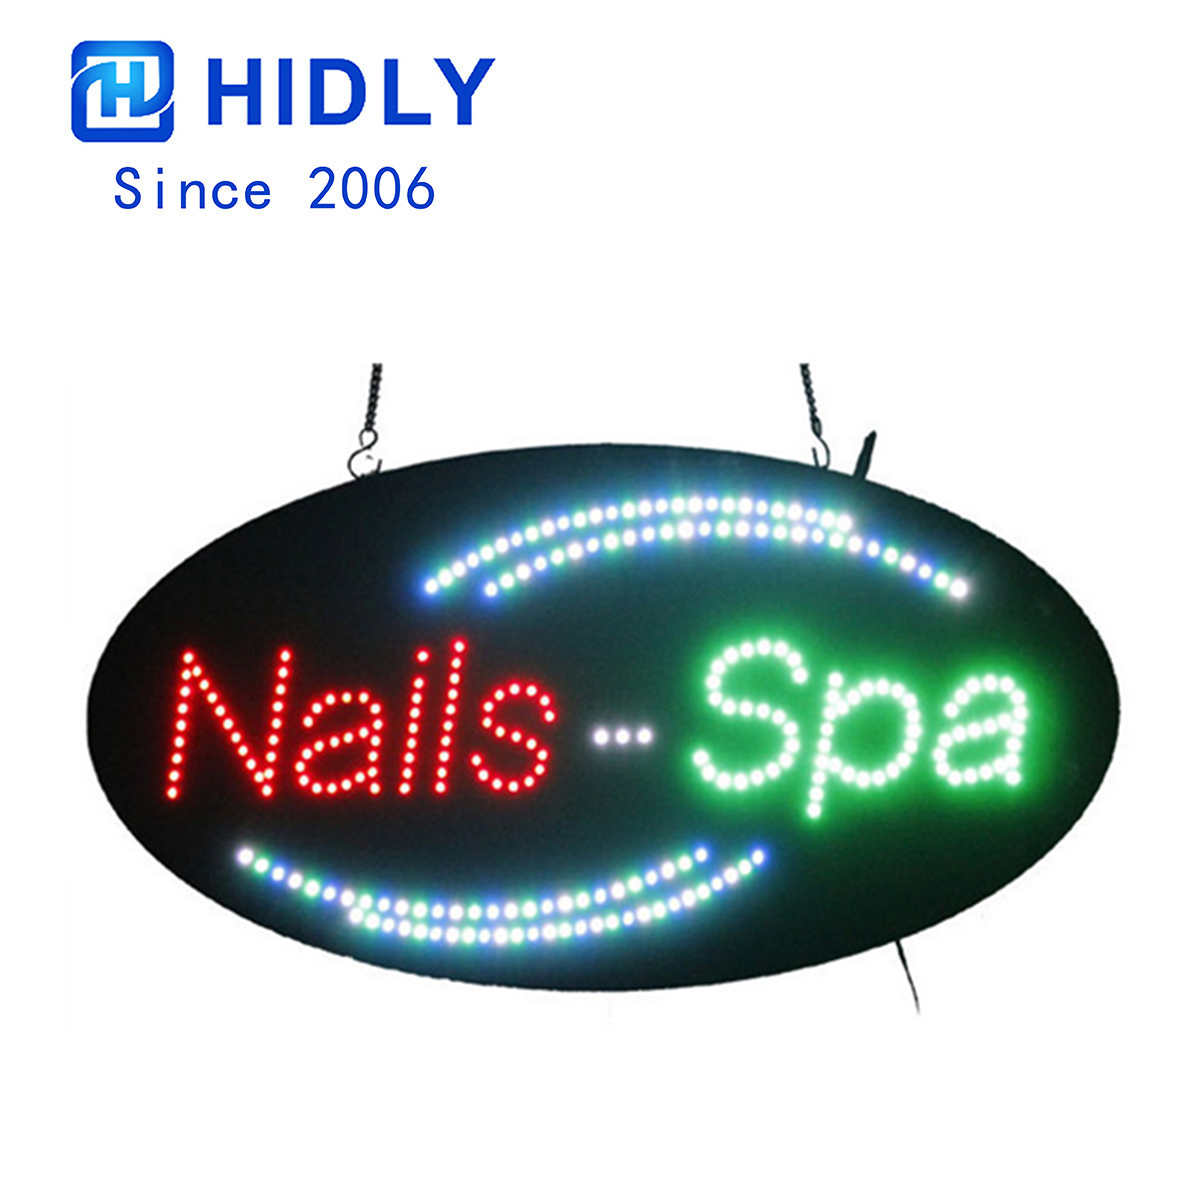 nails spa business led sign